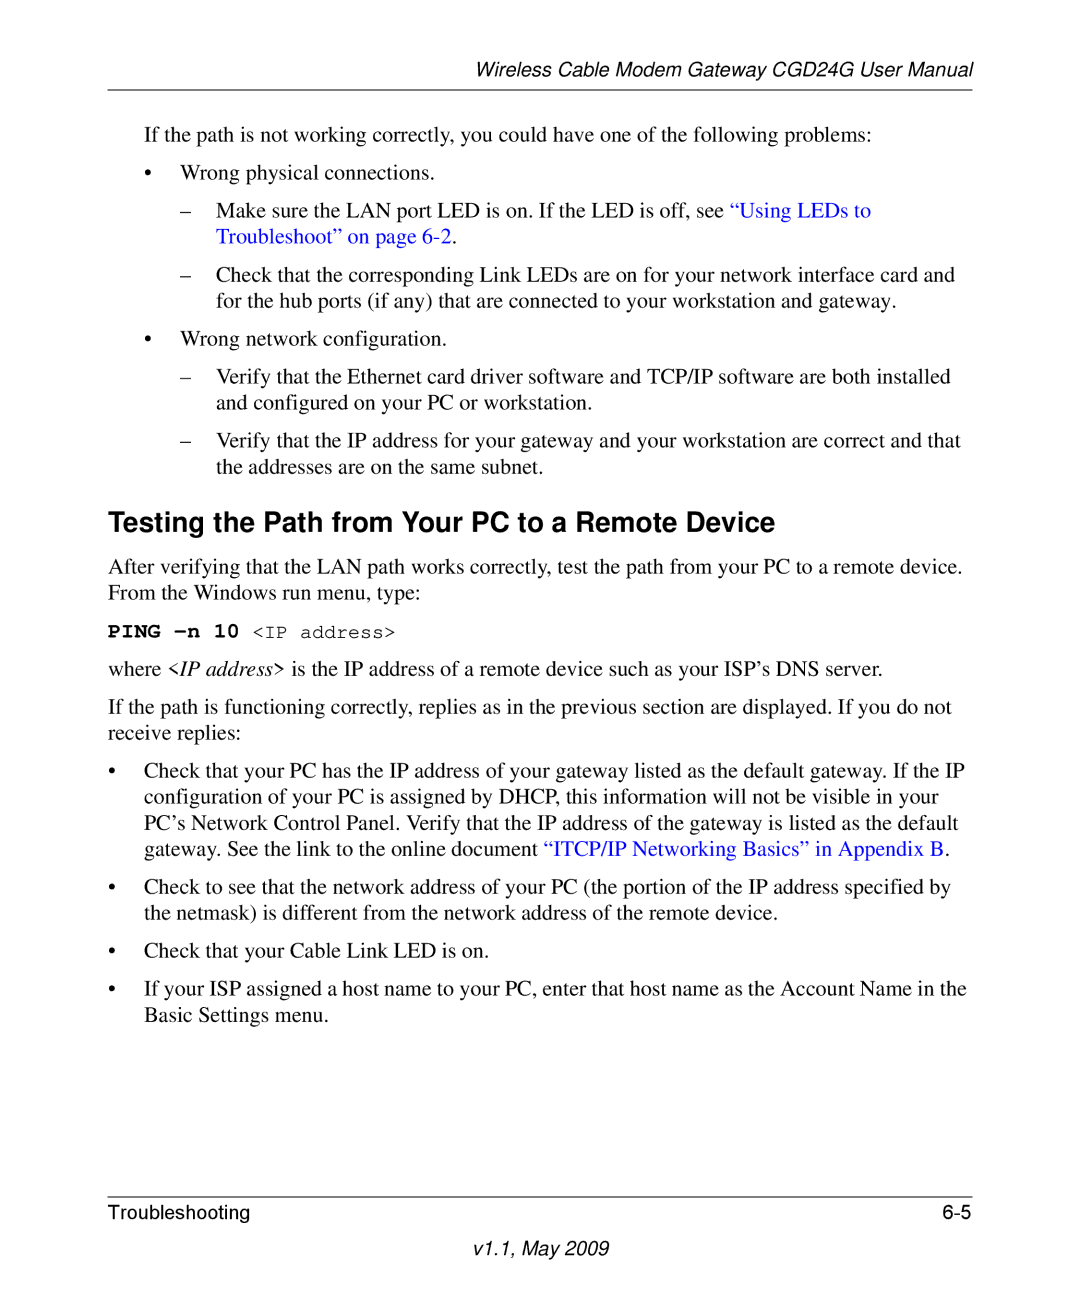 Gateway CGD24G user manual Testing the Path from Your PC to a Remote Device 